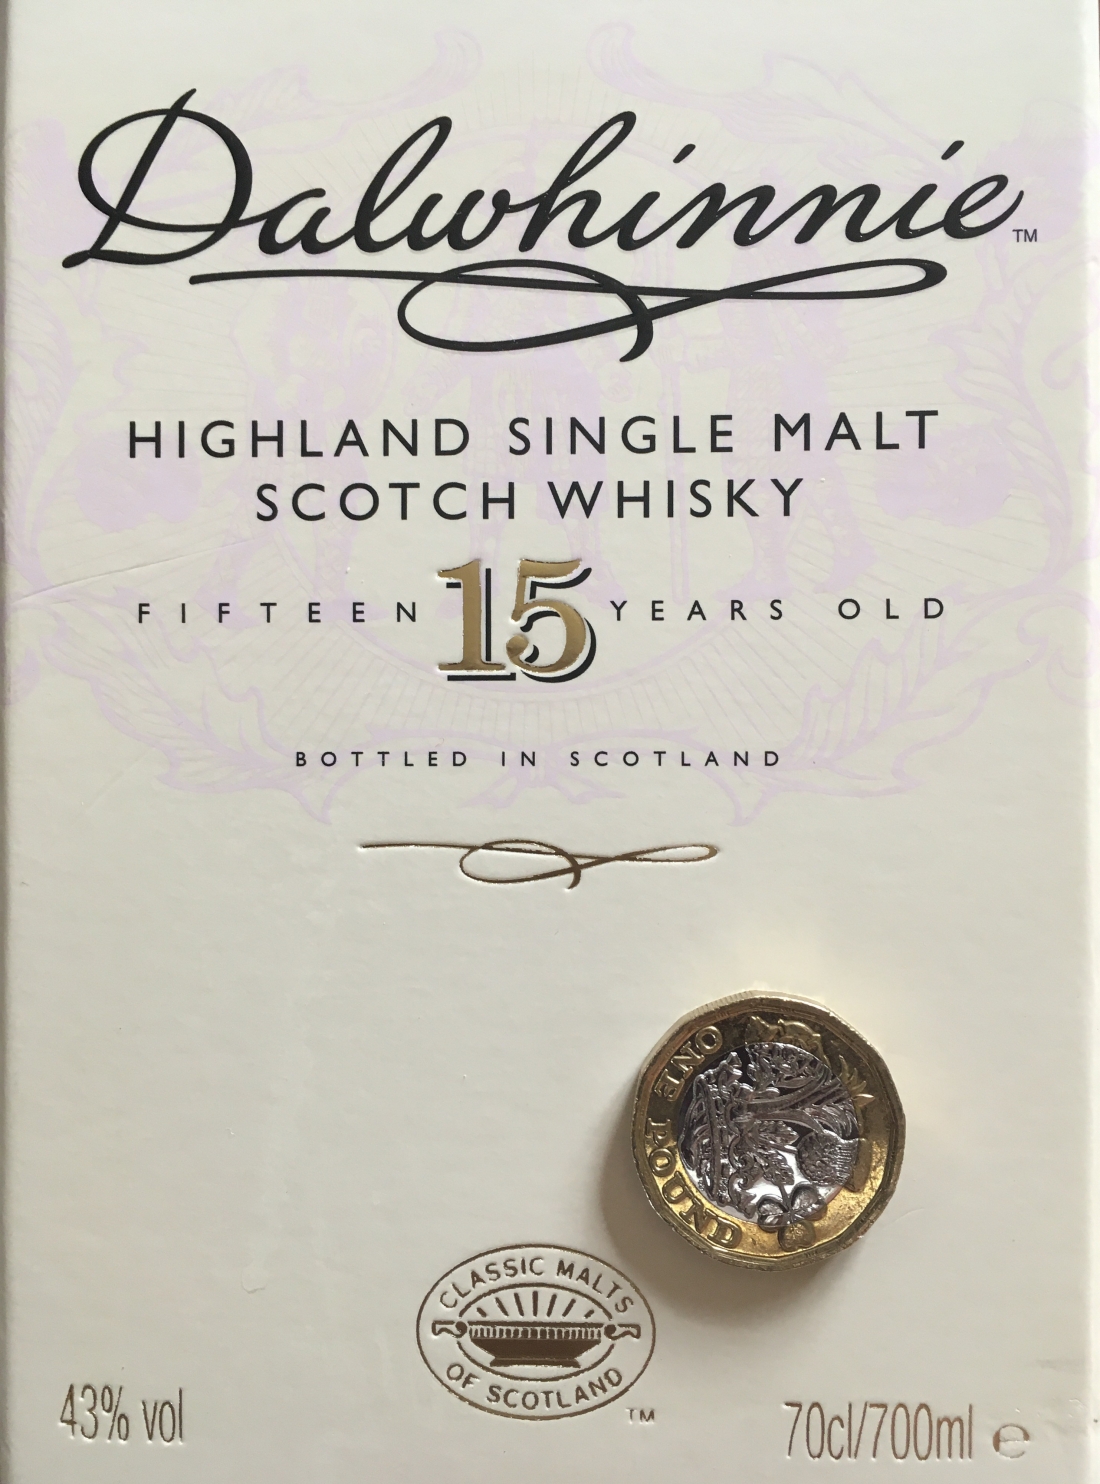 Dalwhinnie whisky and a £1 coin